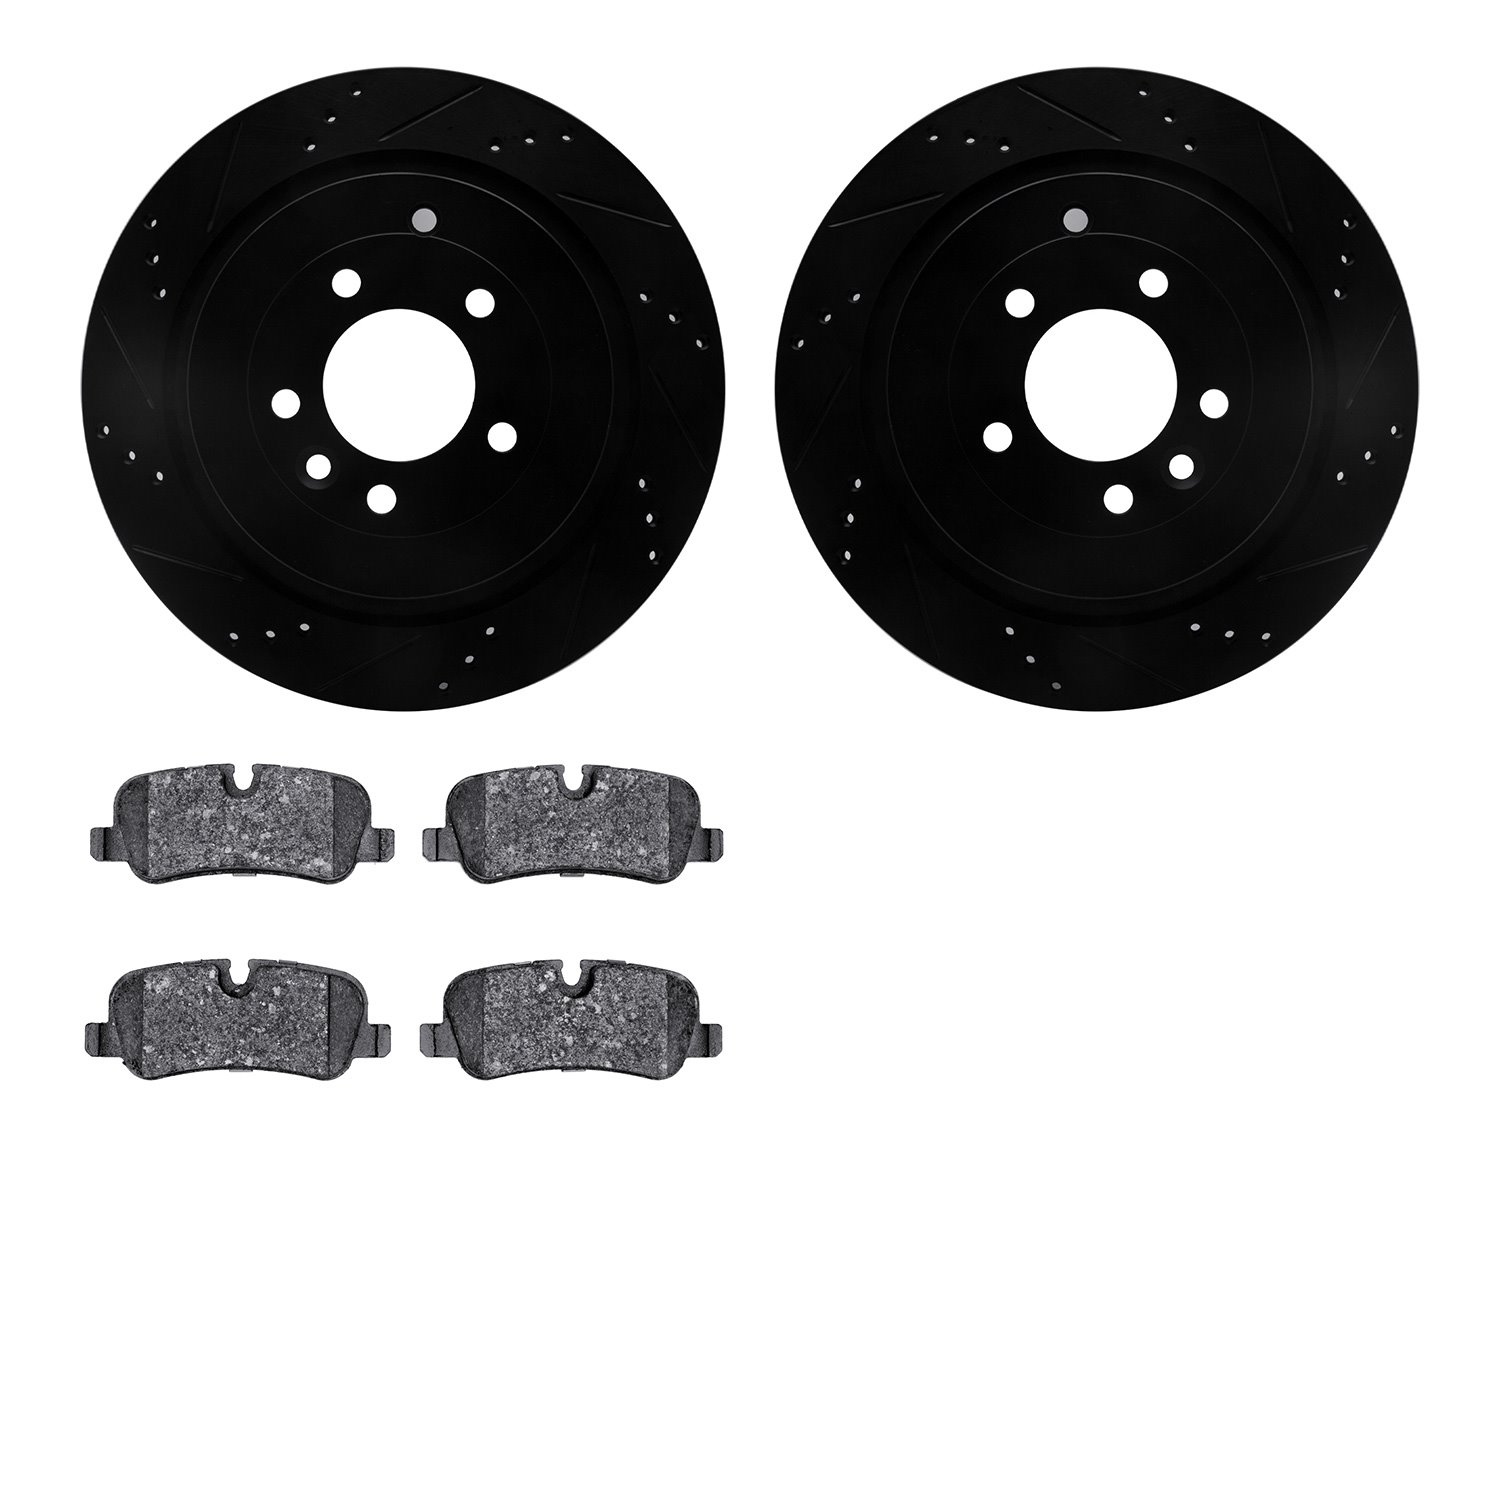 8302-11015 Drilled/Slotted Brake Rotors with 3000-Series Ceramic Brake Pads Kit [Black], 2005-2016 Land Rover, Position: Rear